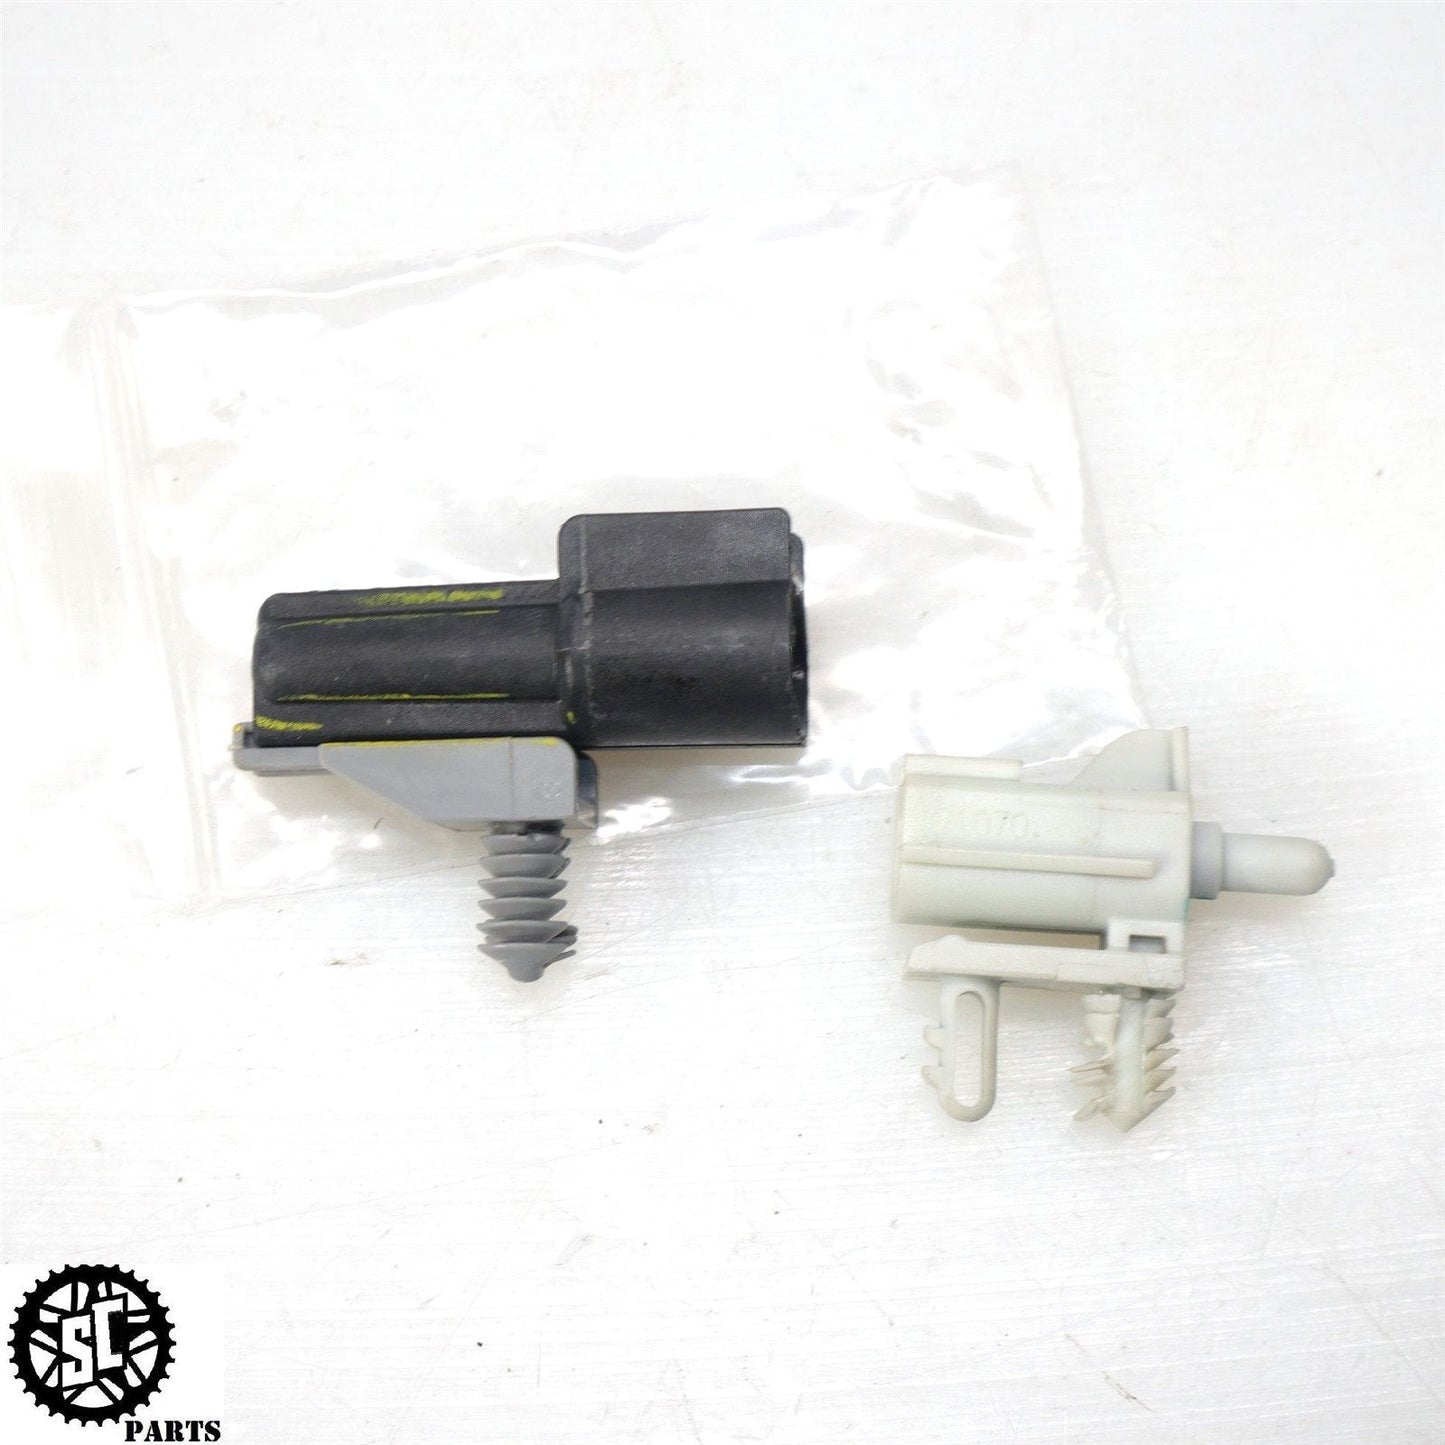 2017-2022 HARLEY ROAD GLIDE AMBIENT AIR TEMPERATURE SENSOR THERMOMETER HD30